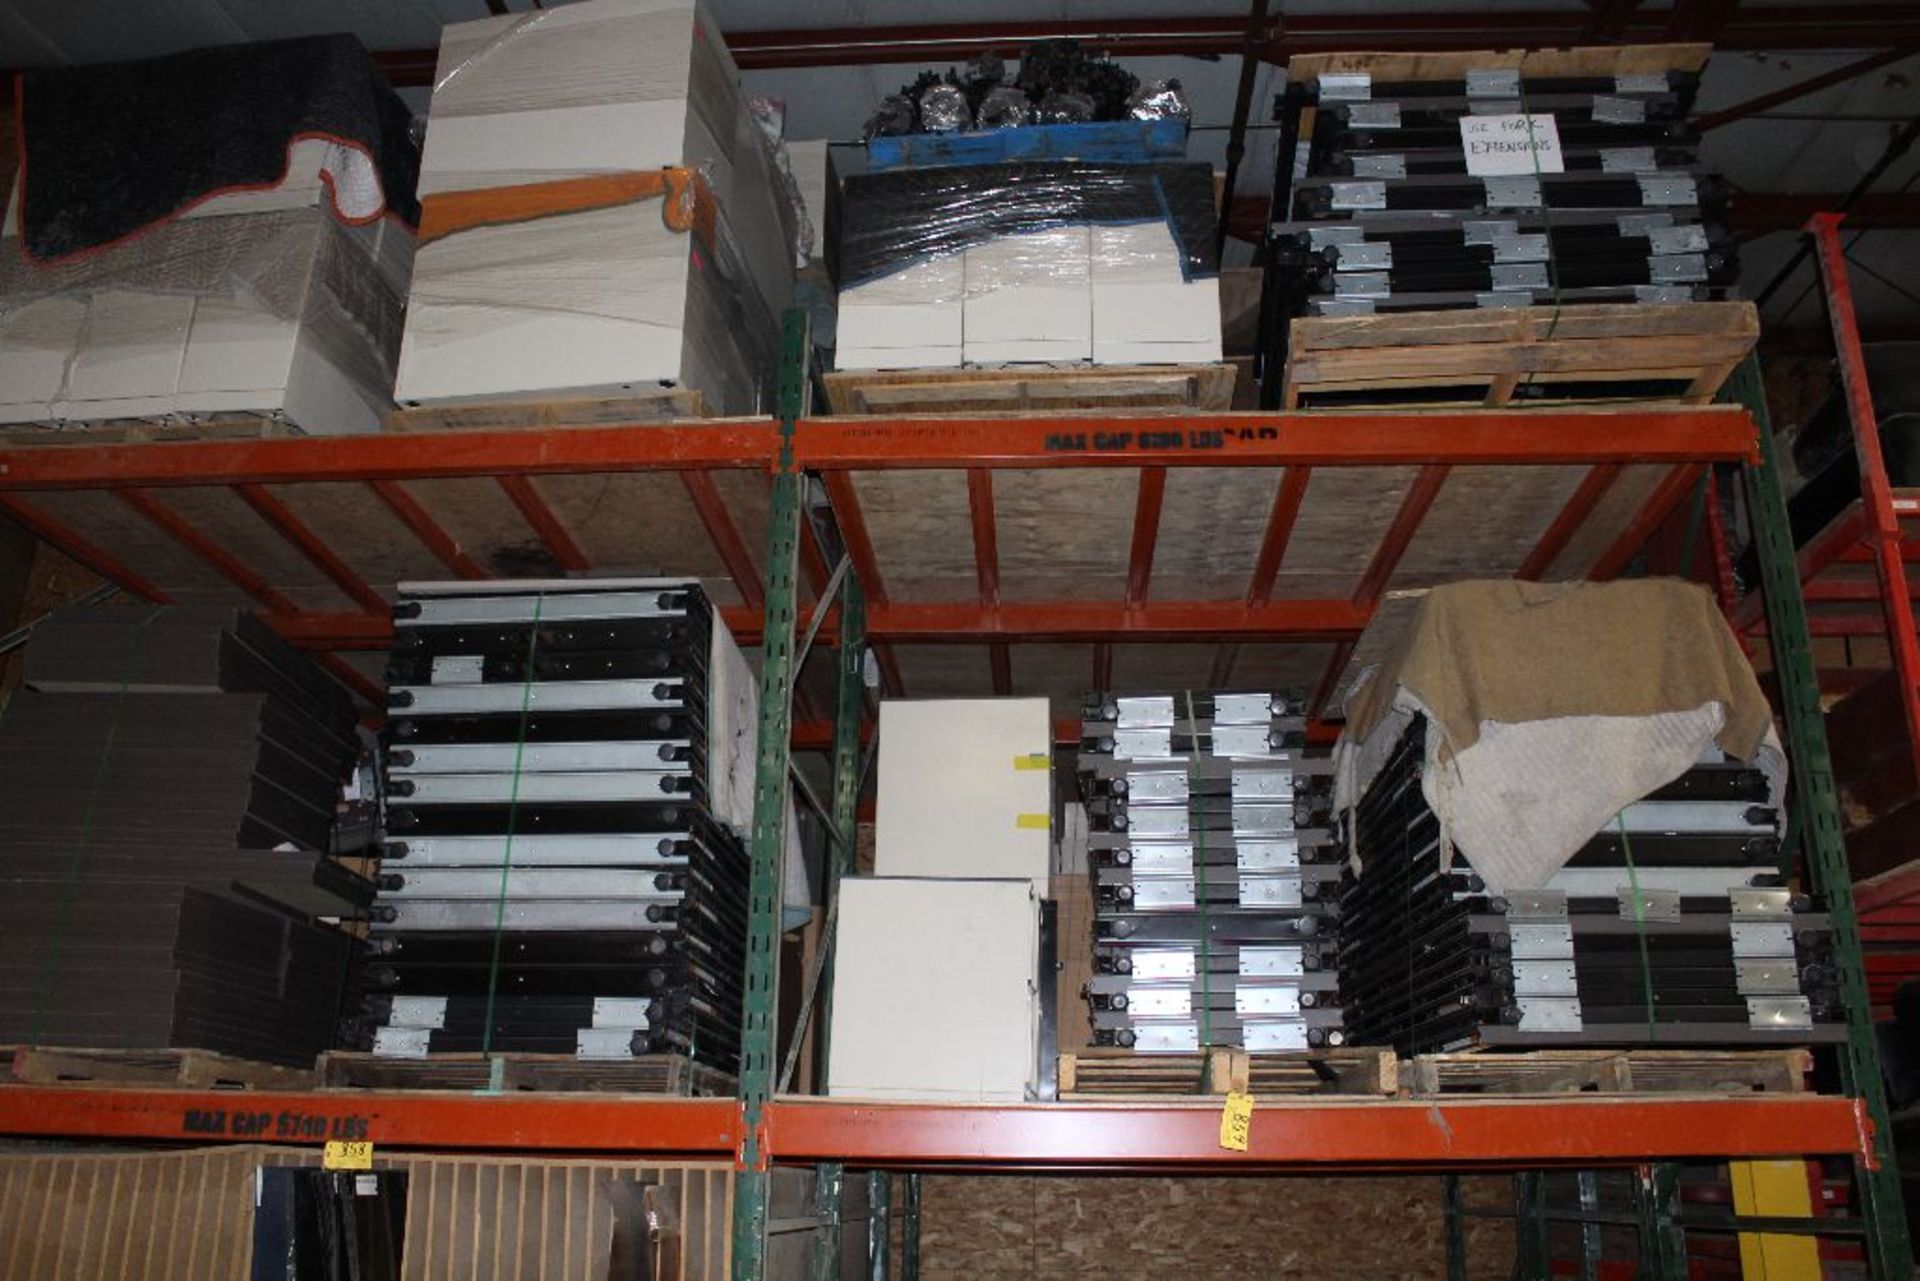 Contents on pallet racks: office dividers, files, cabinets. - Image 2 of 4